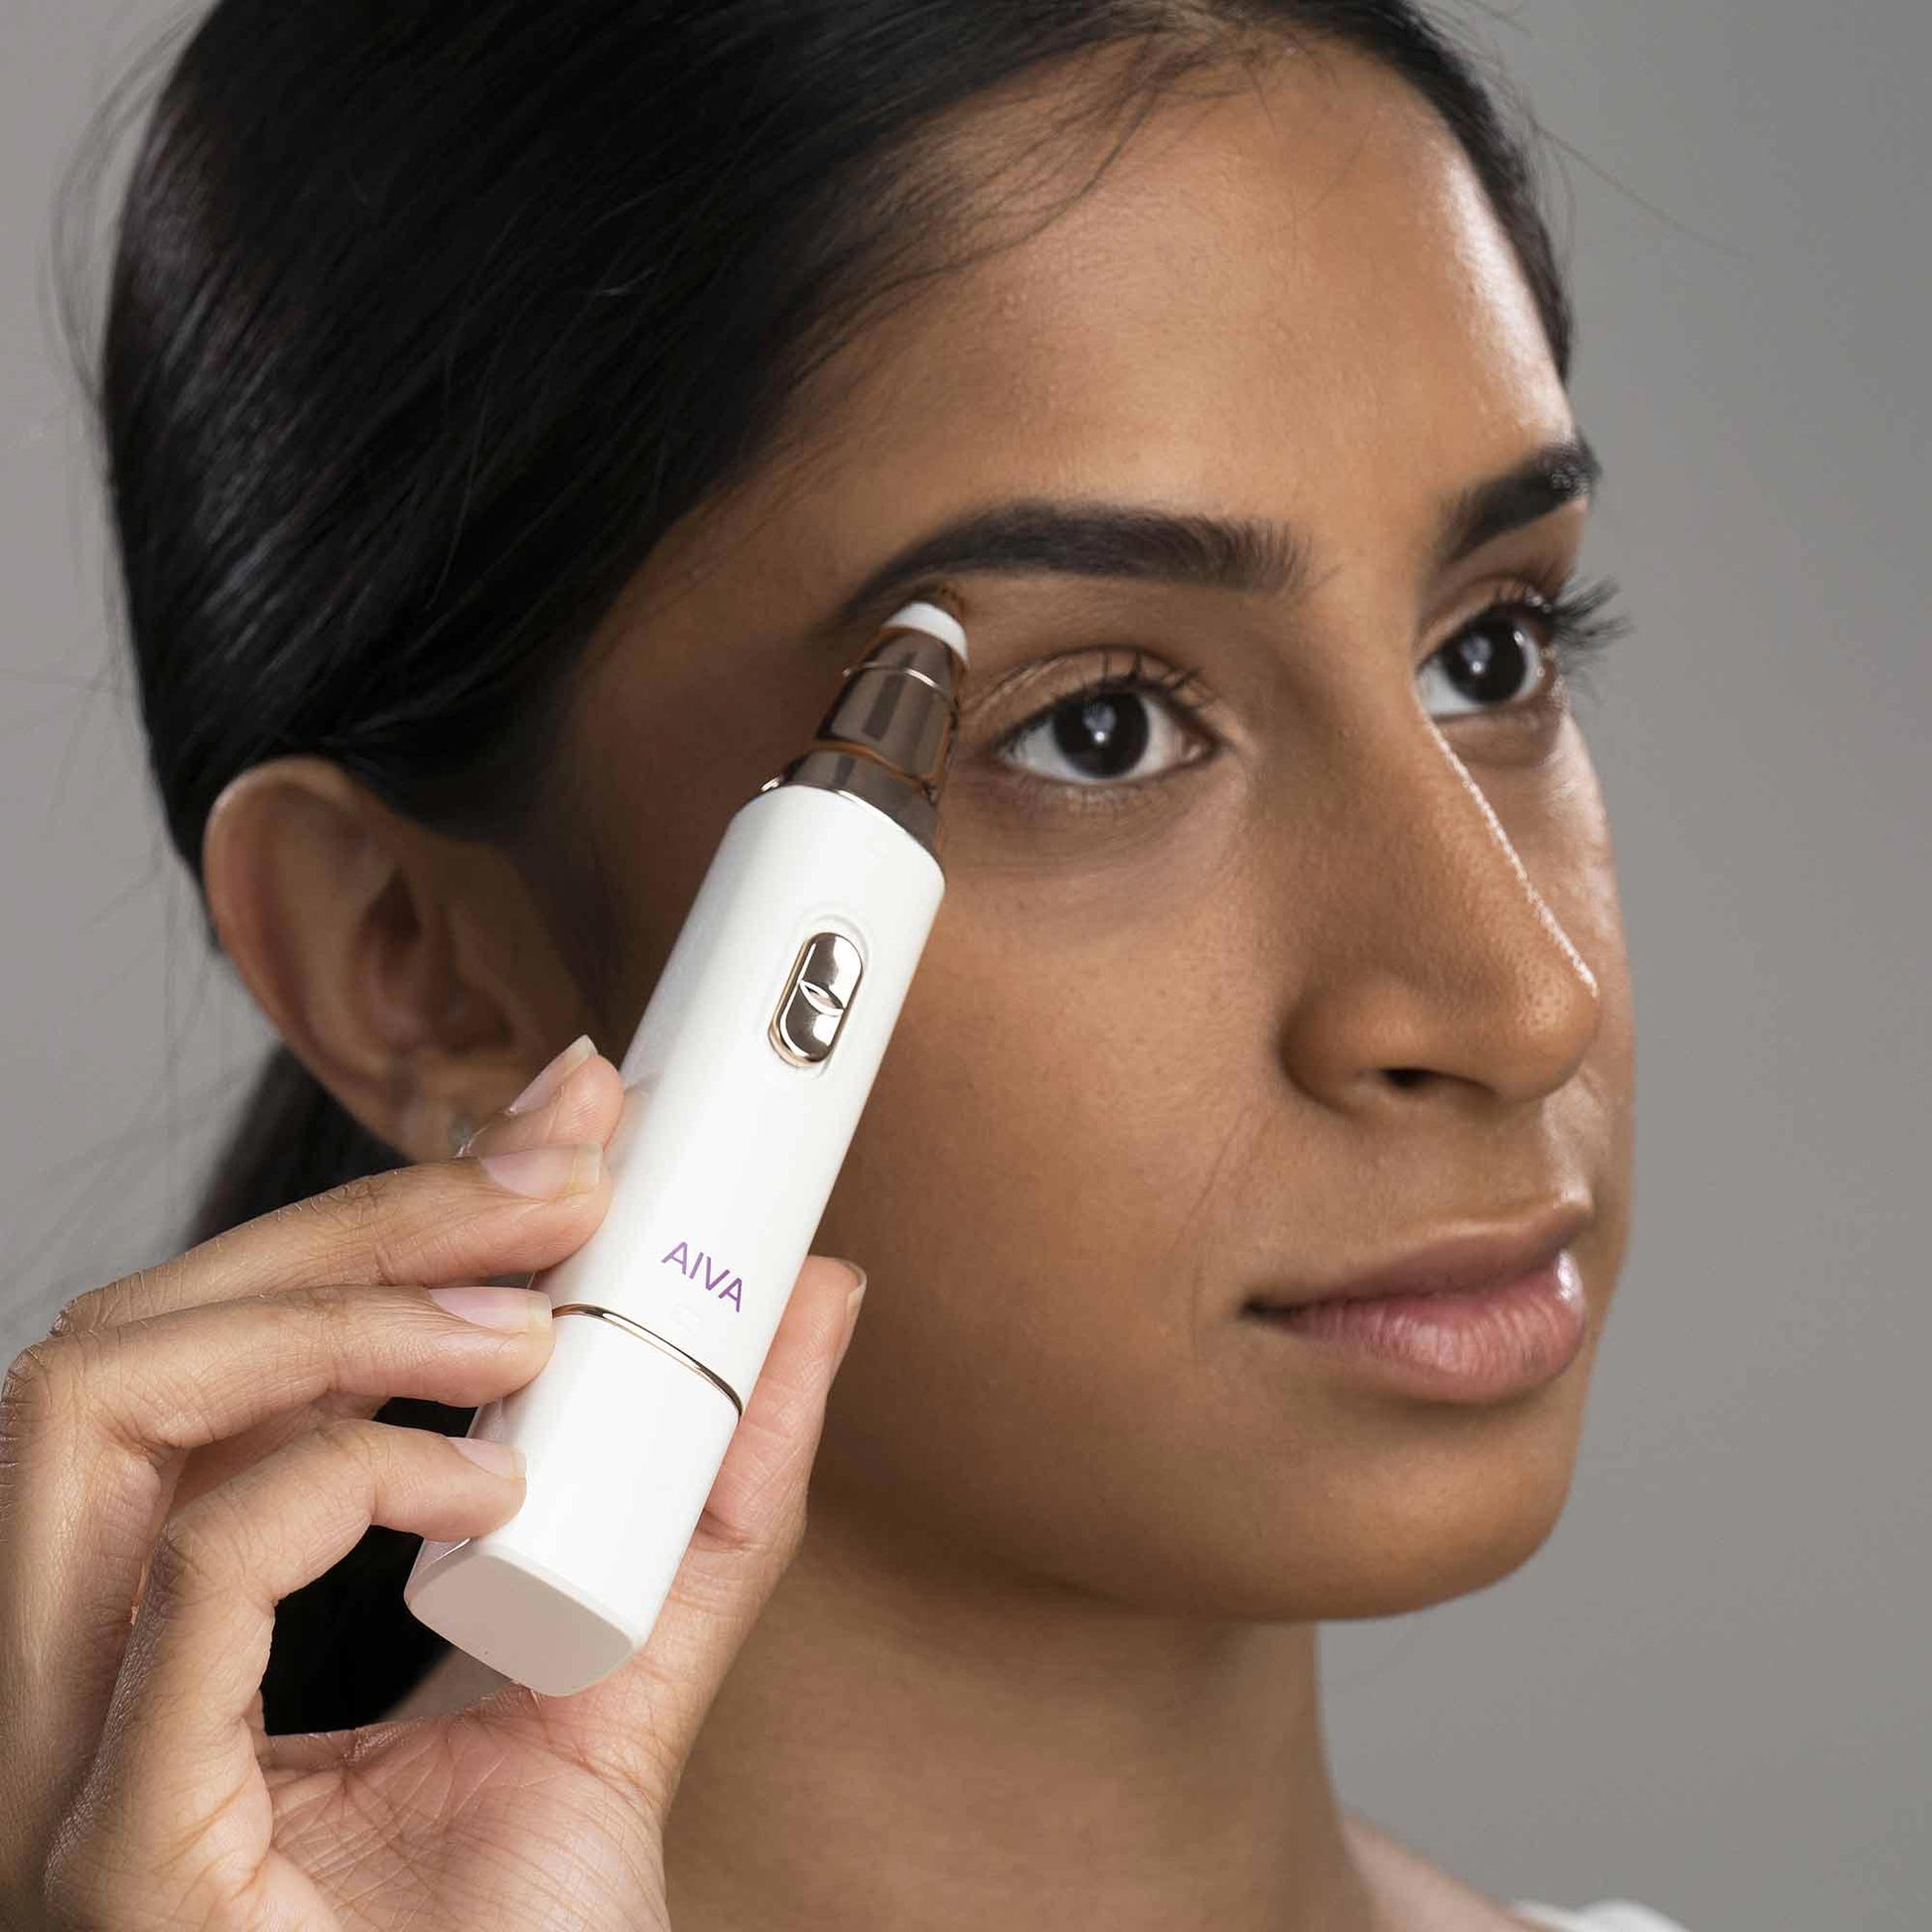 A woman is using Spa Sciences Eyes & Lips on her face.